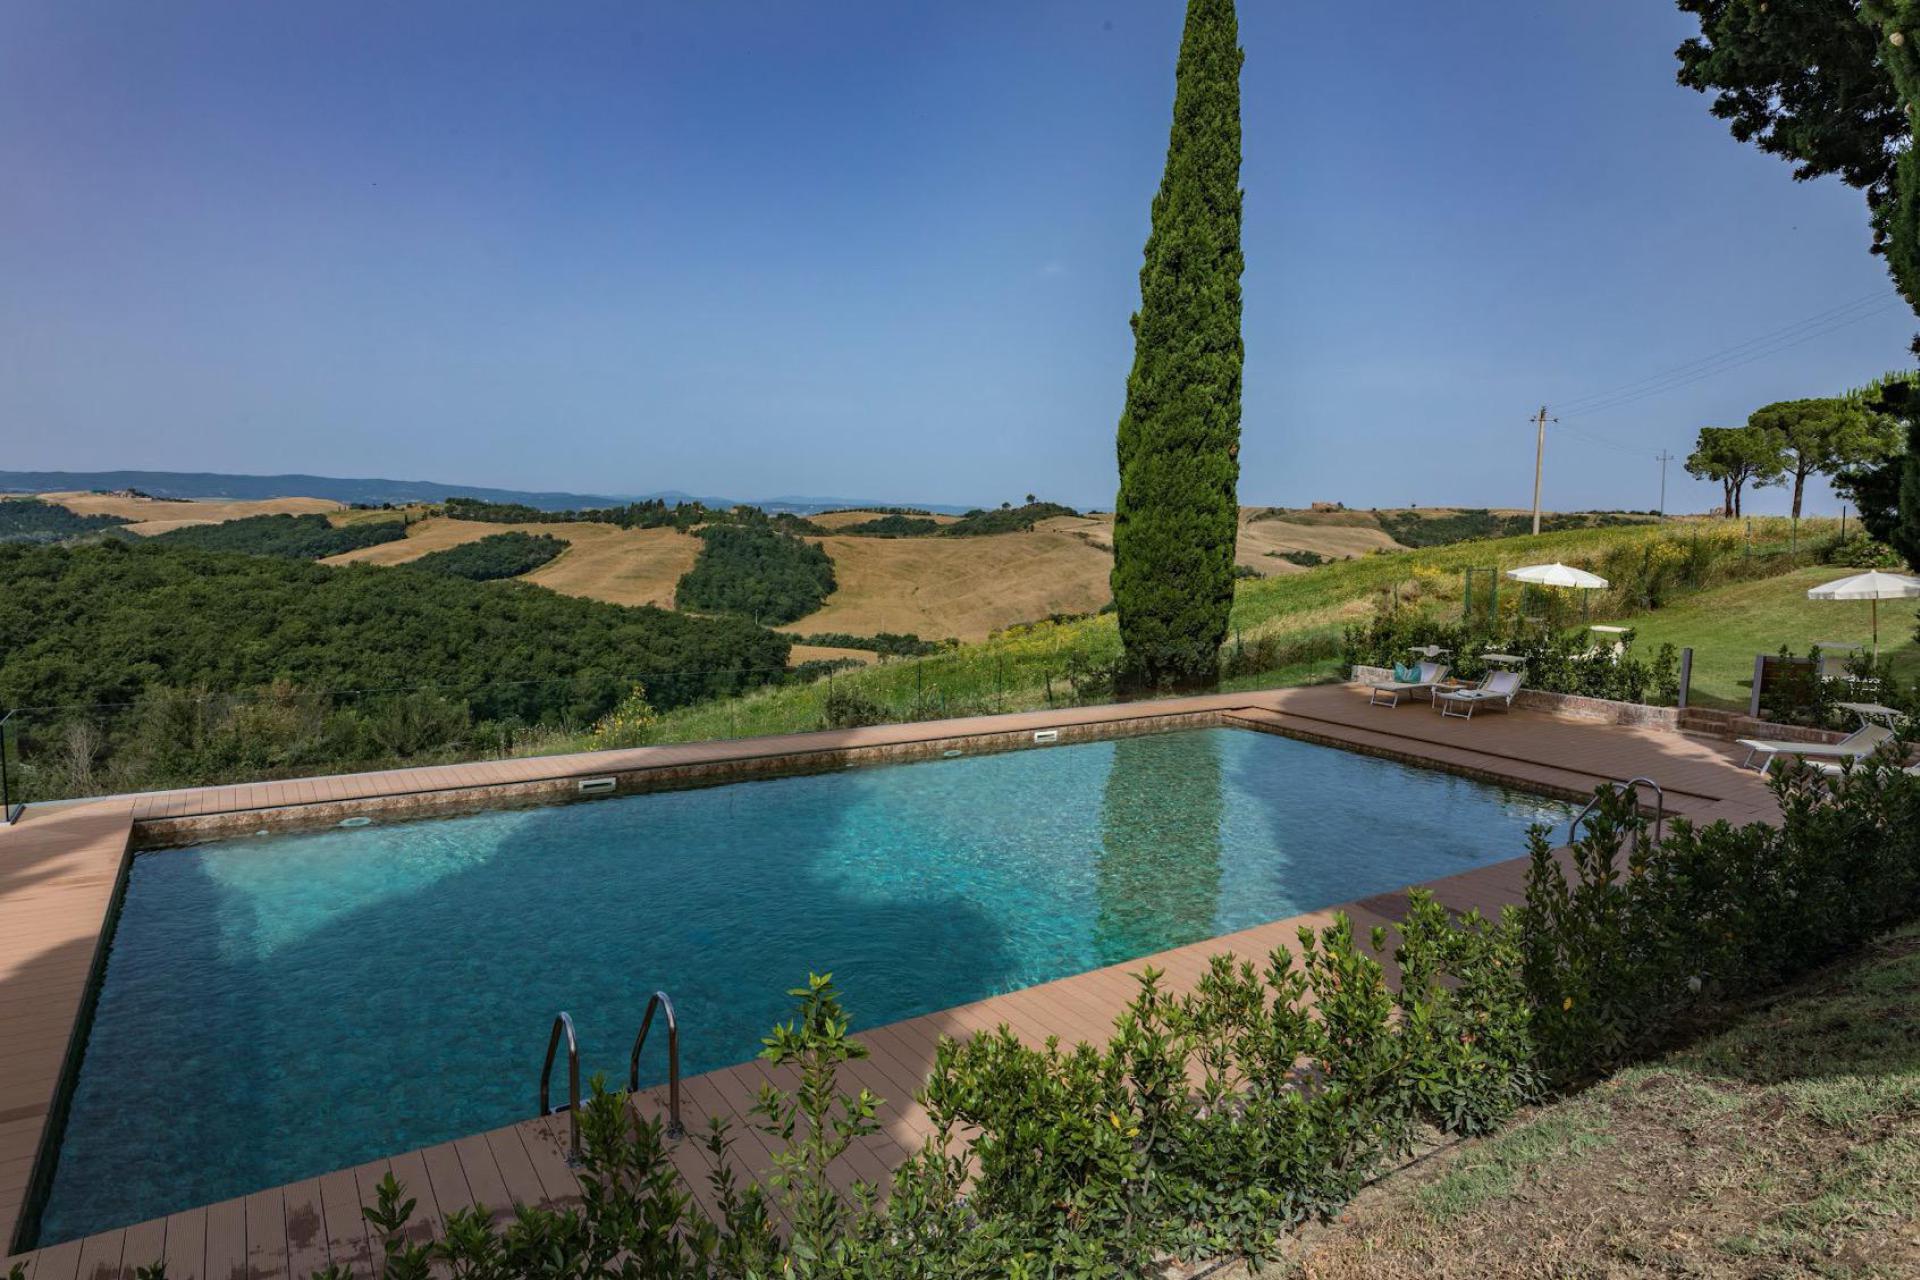 Agriturismo Tuscany Agriturismo in Tuscany with great views